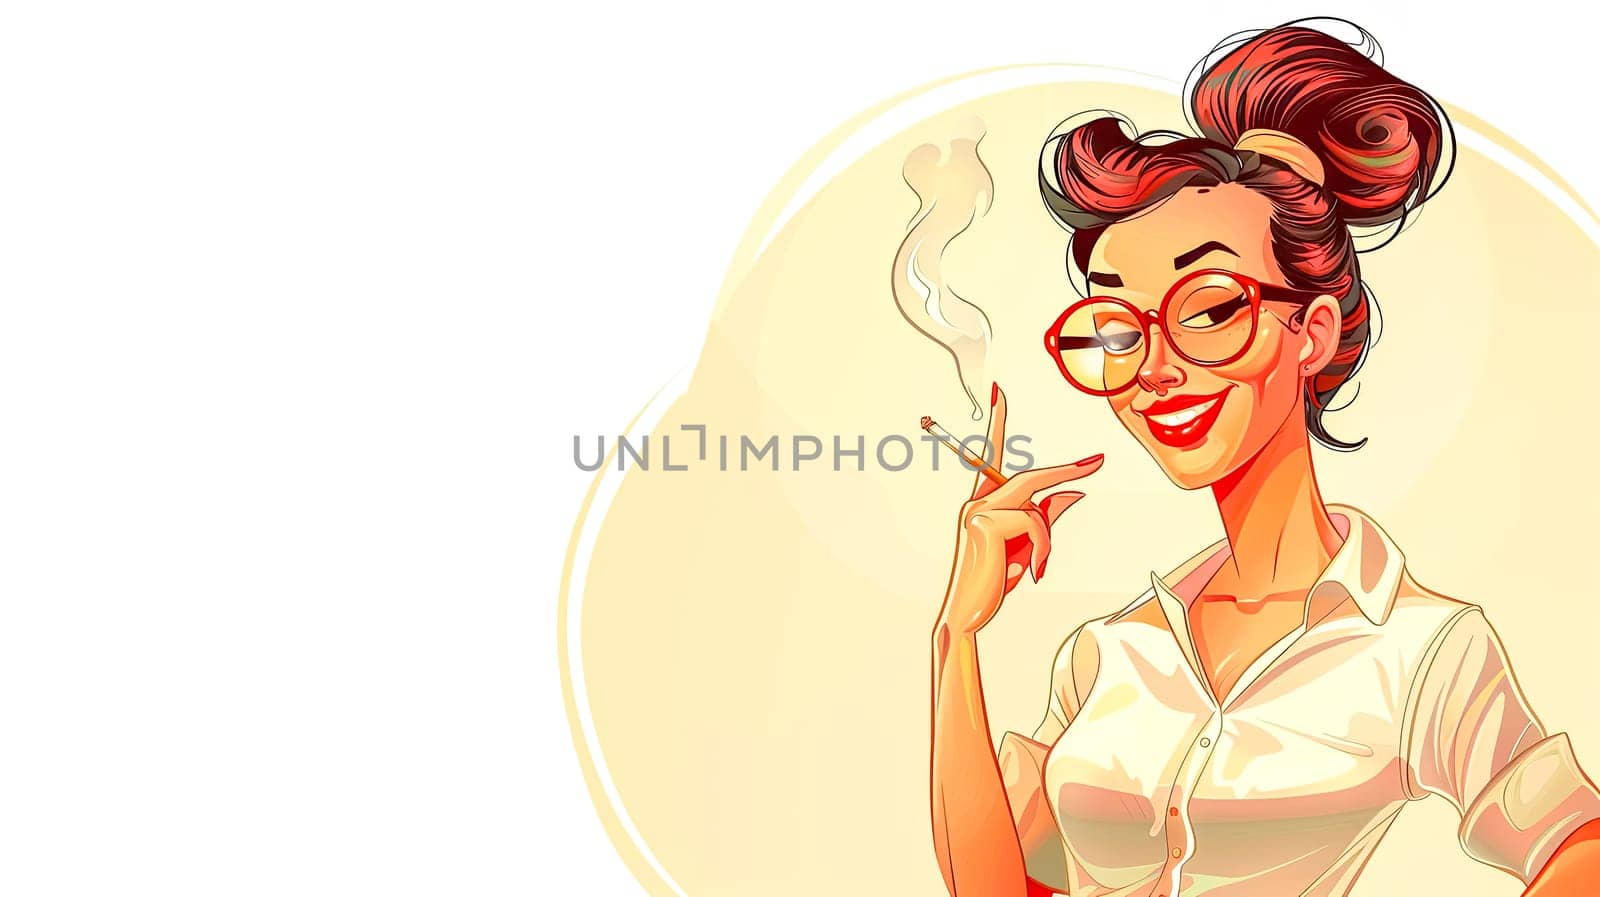 Retro Styled Woman with Glasses Smoking Illustration, copy space